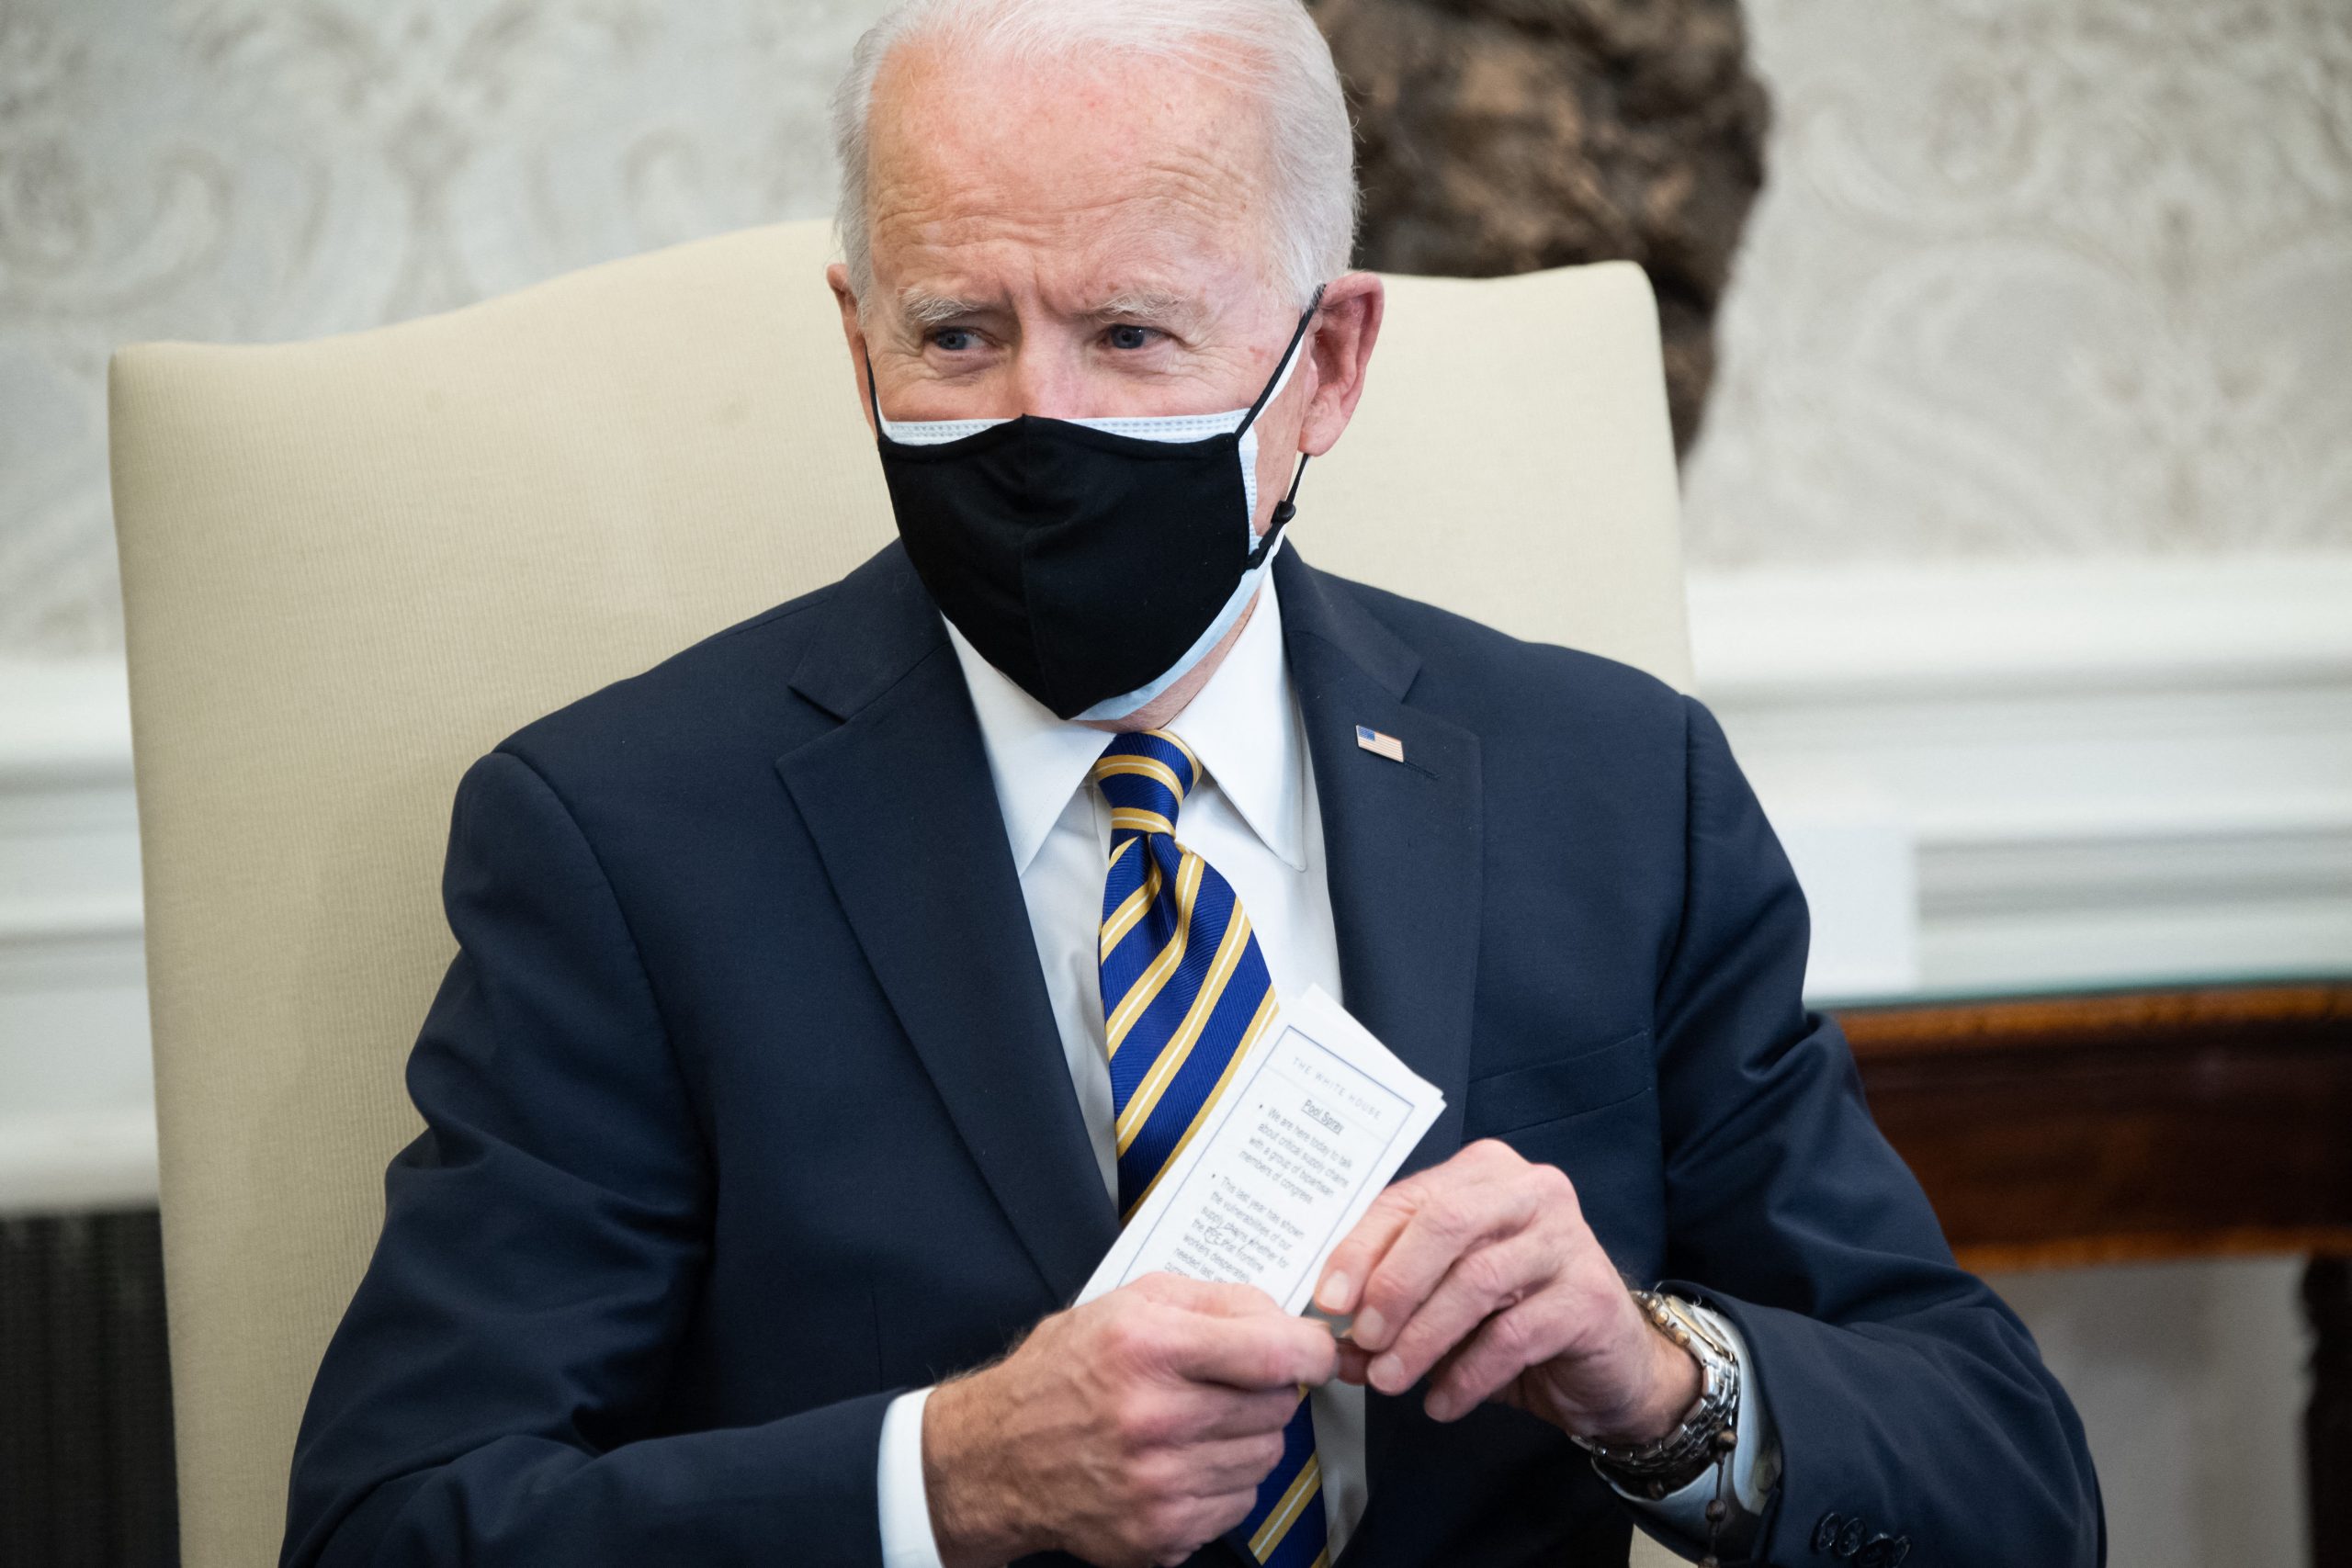 US President Joe Biden shows support for unions of Amazon employees